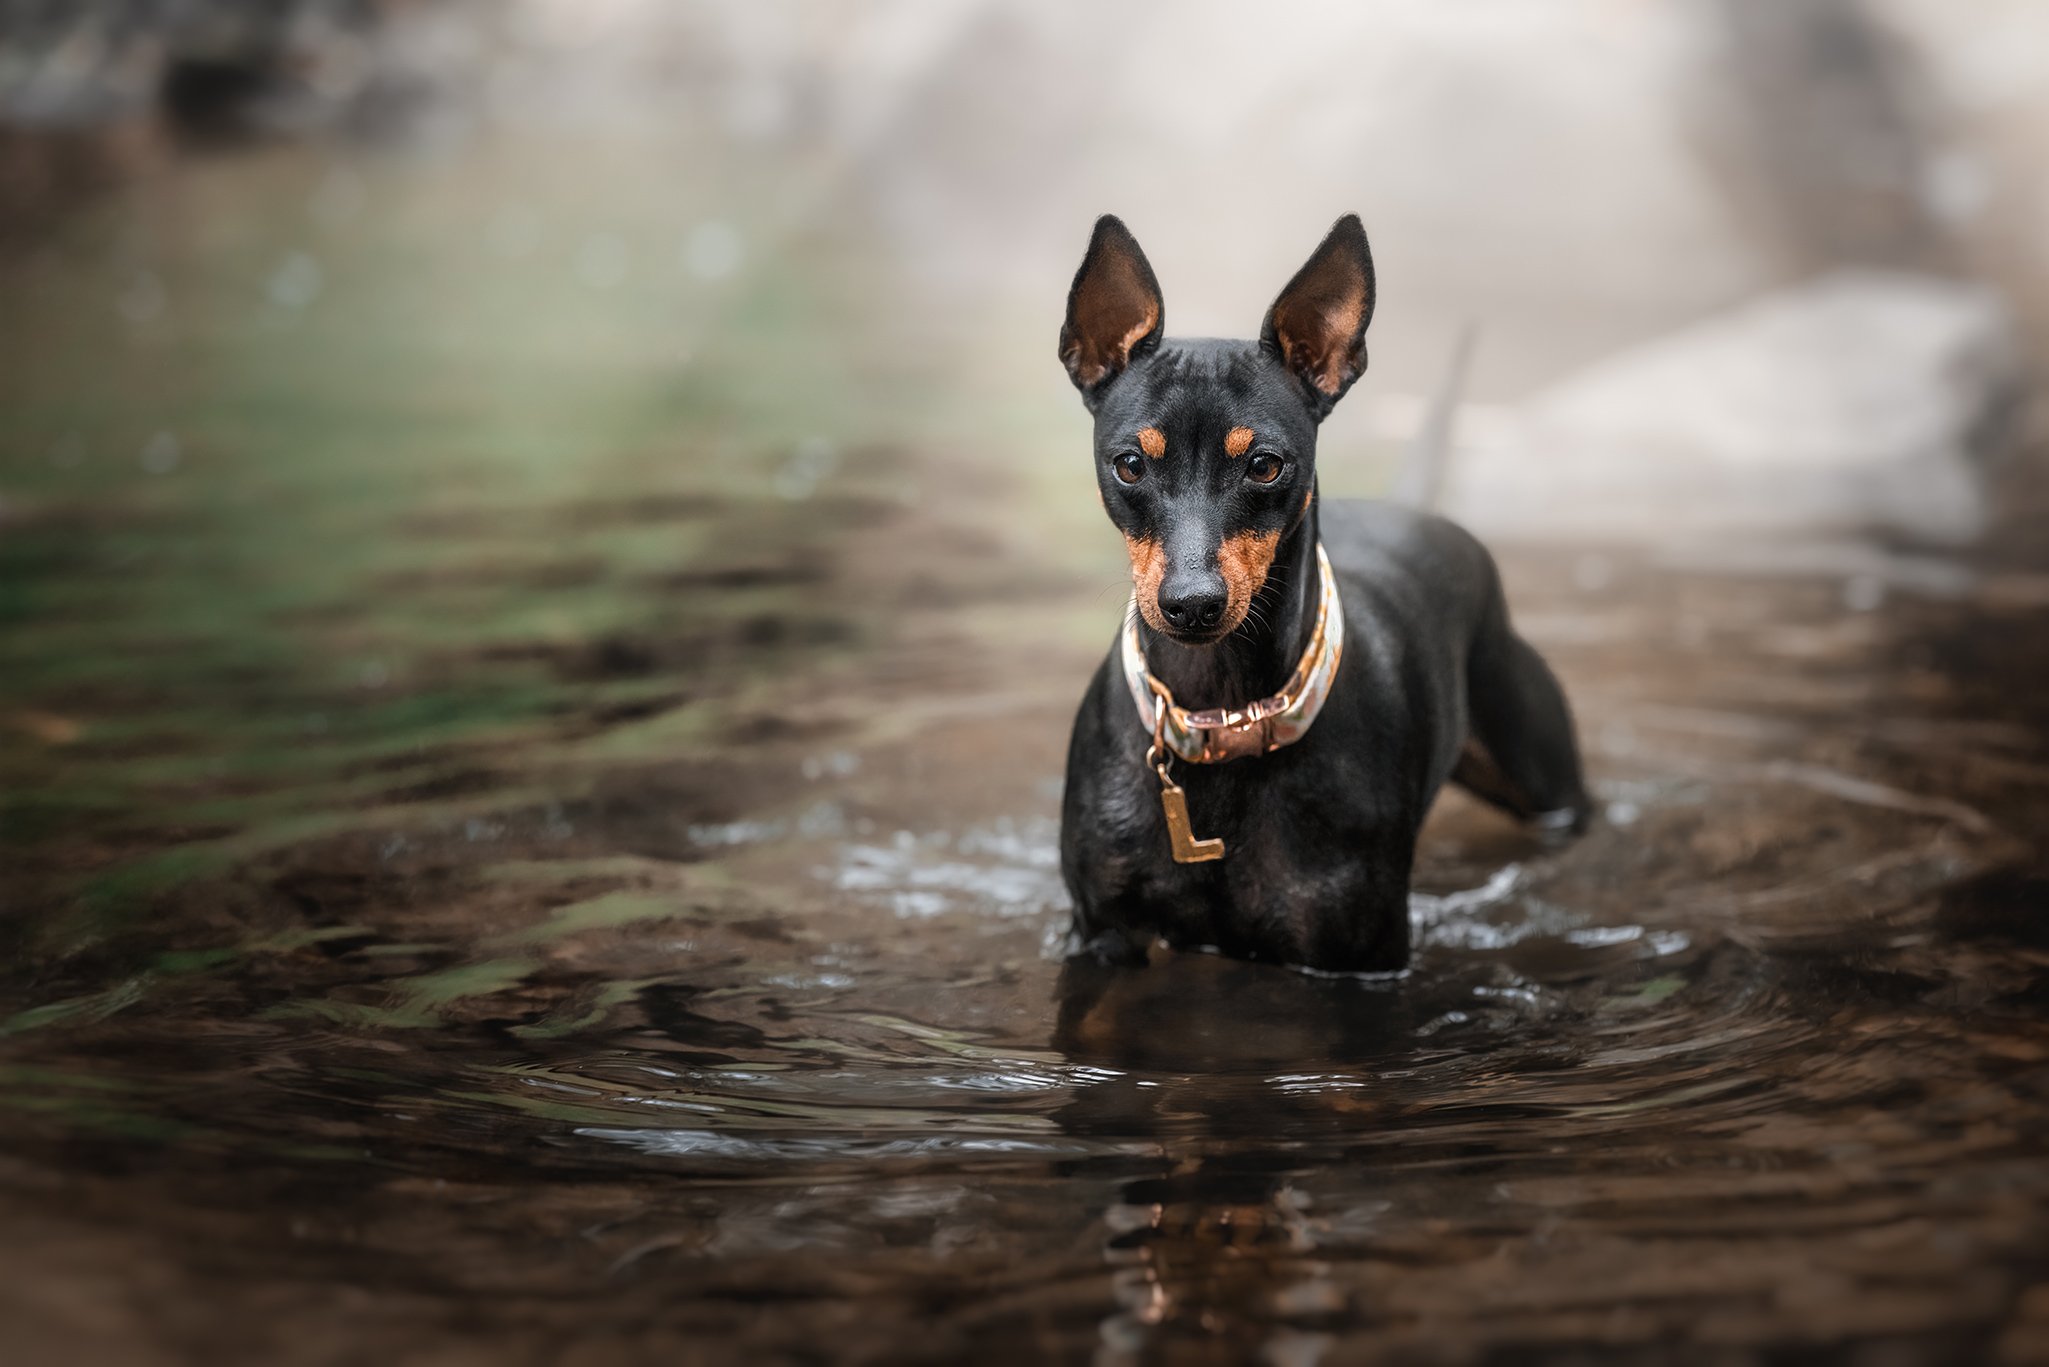 8x12 Lizzie (English Toy Terrier) - 180222 - full res - 17.jpg